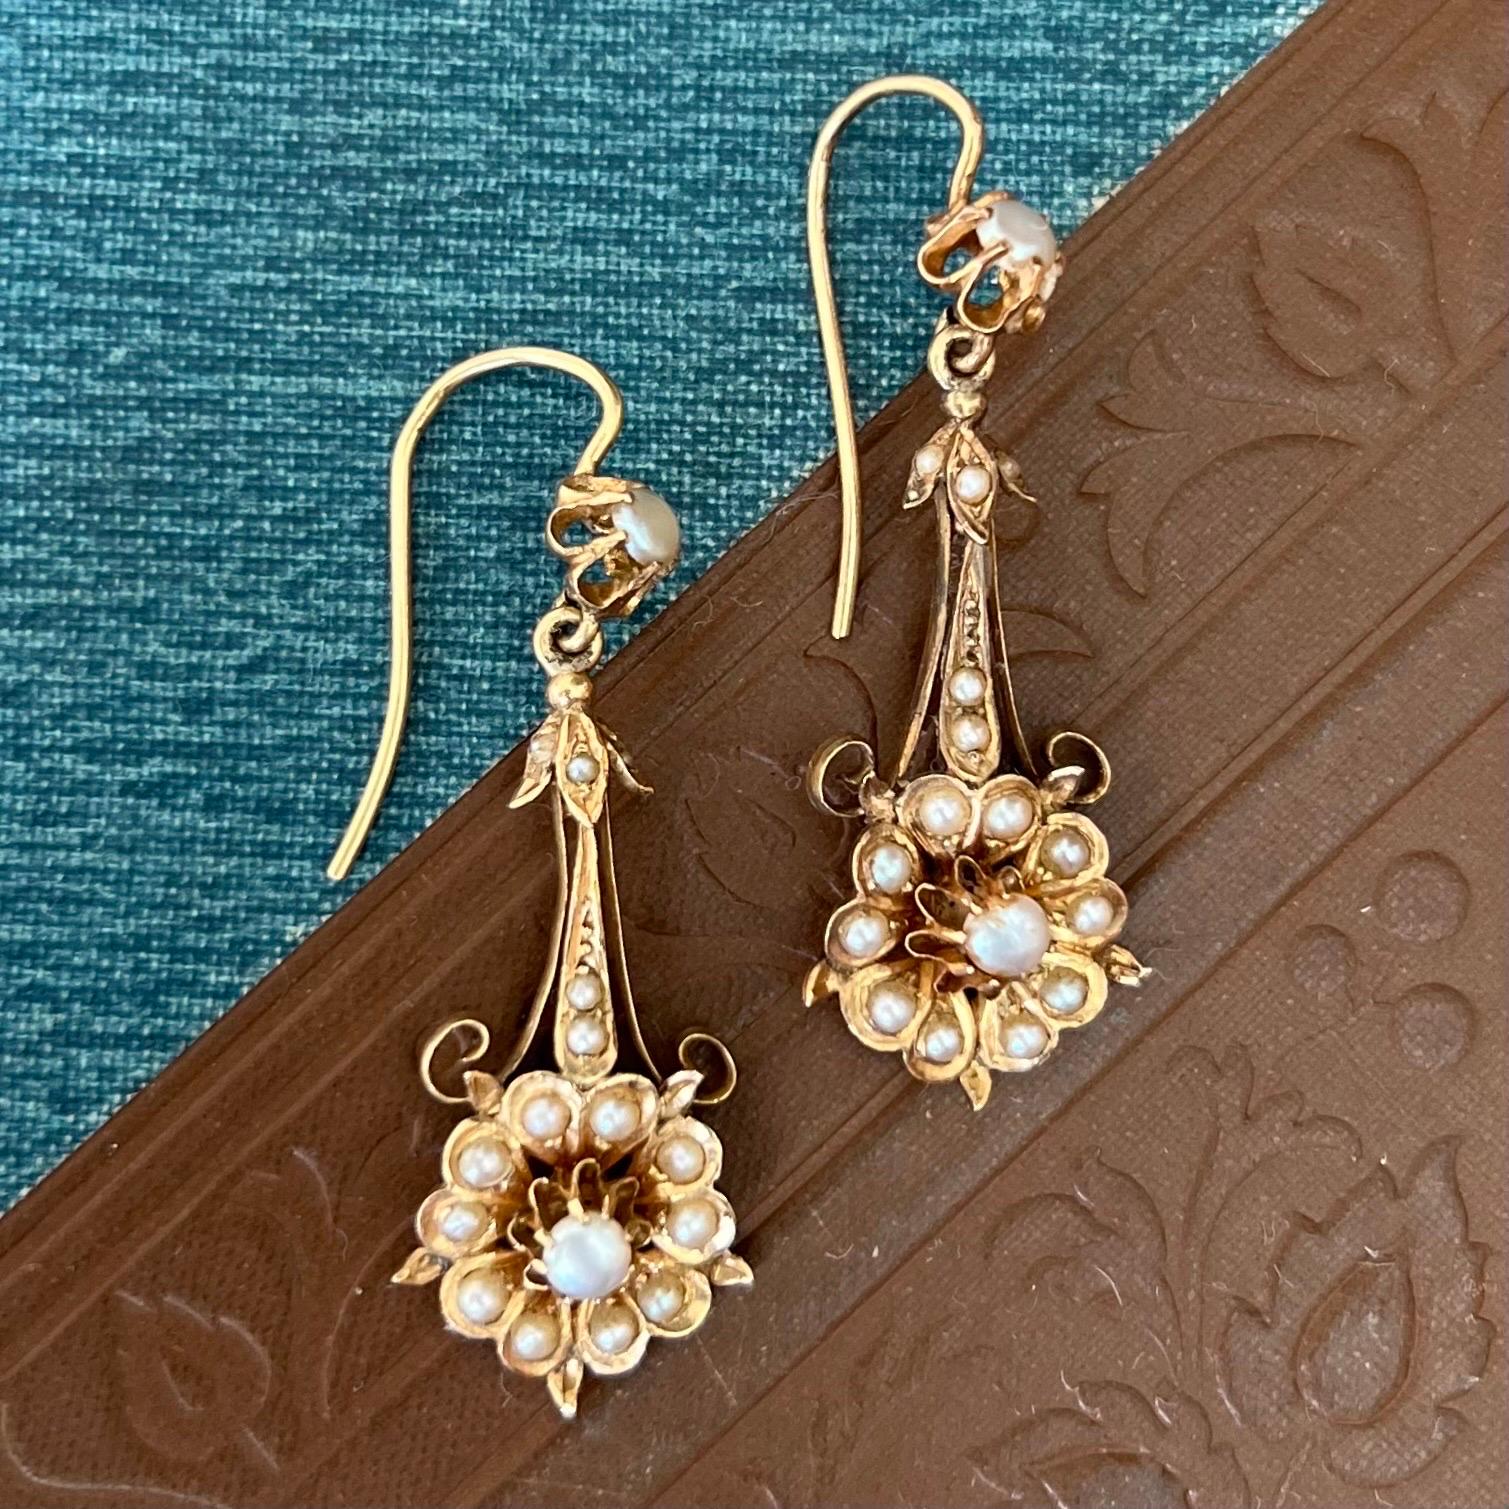 These late 19th century 14 karat gold dangle earrings are set with seventeen round pearls. The earrings are designed into a beautiful flower with leaves with an articulated frame structure. The flower has a cluster of lovely small seed pearls while